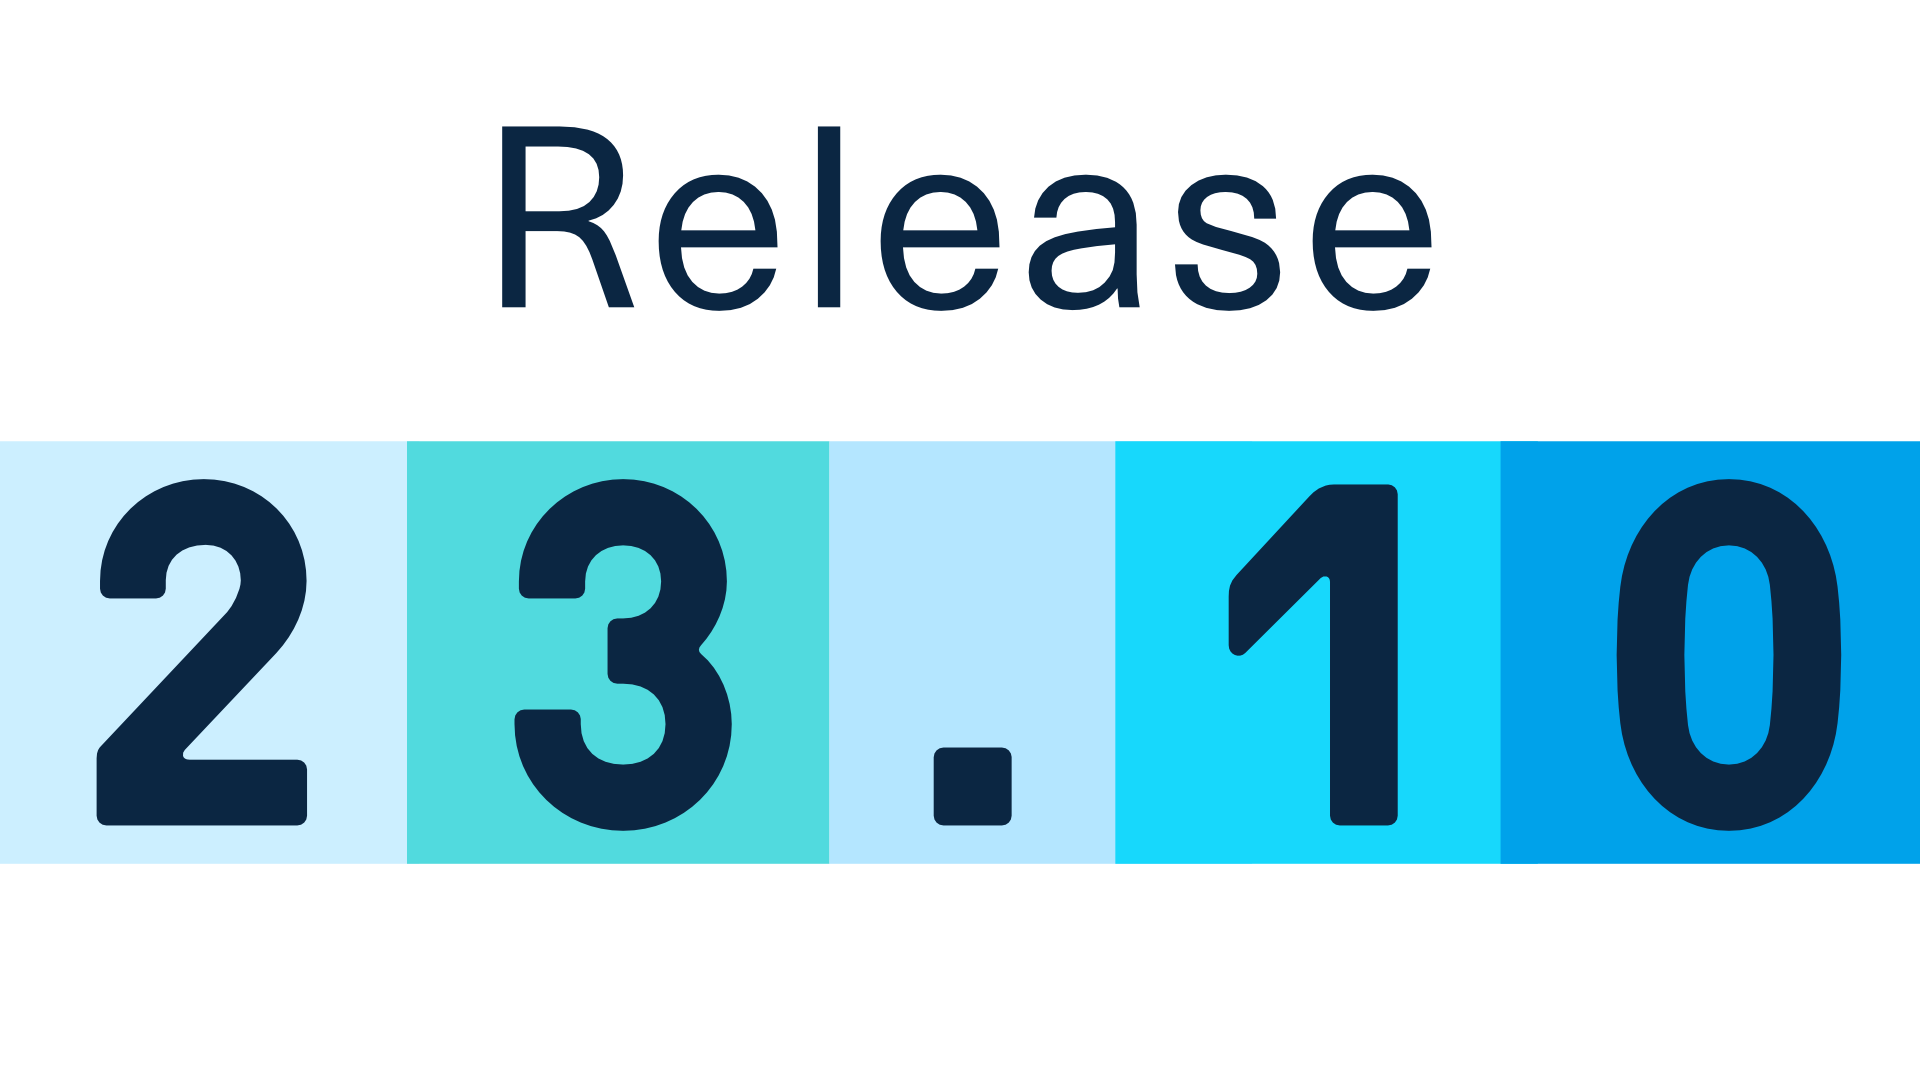 Release 23.10